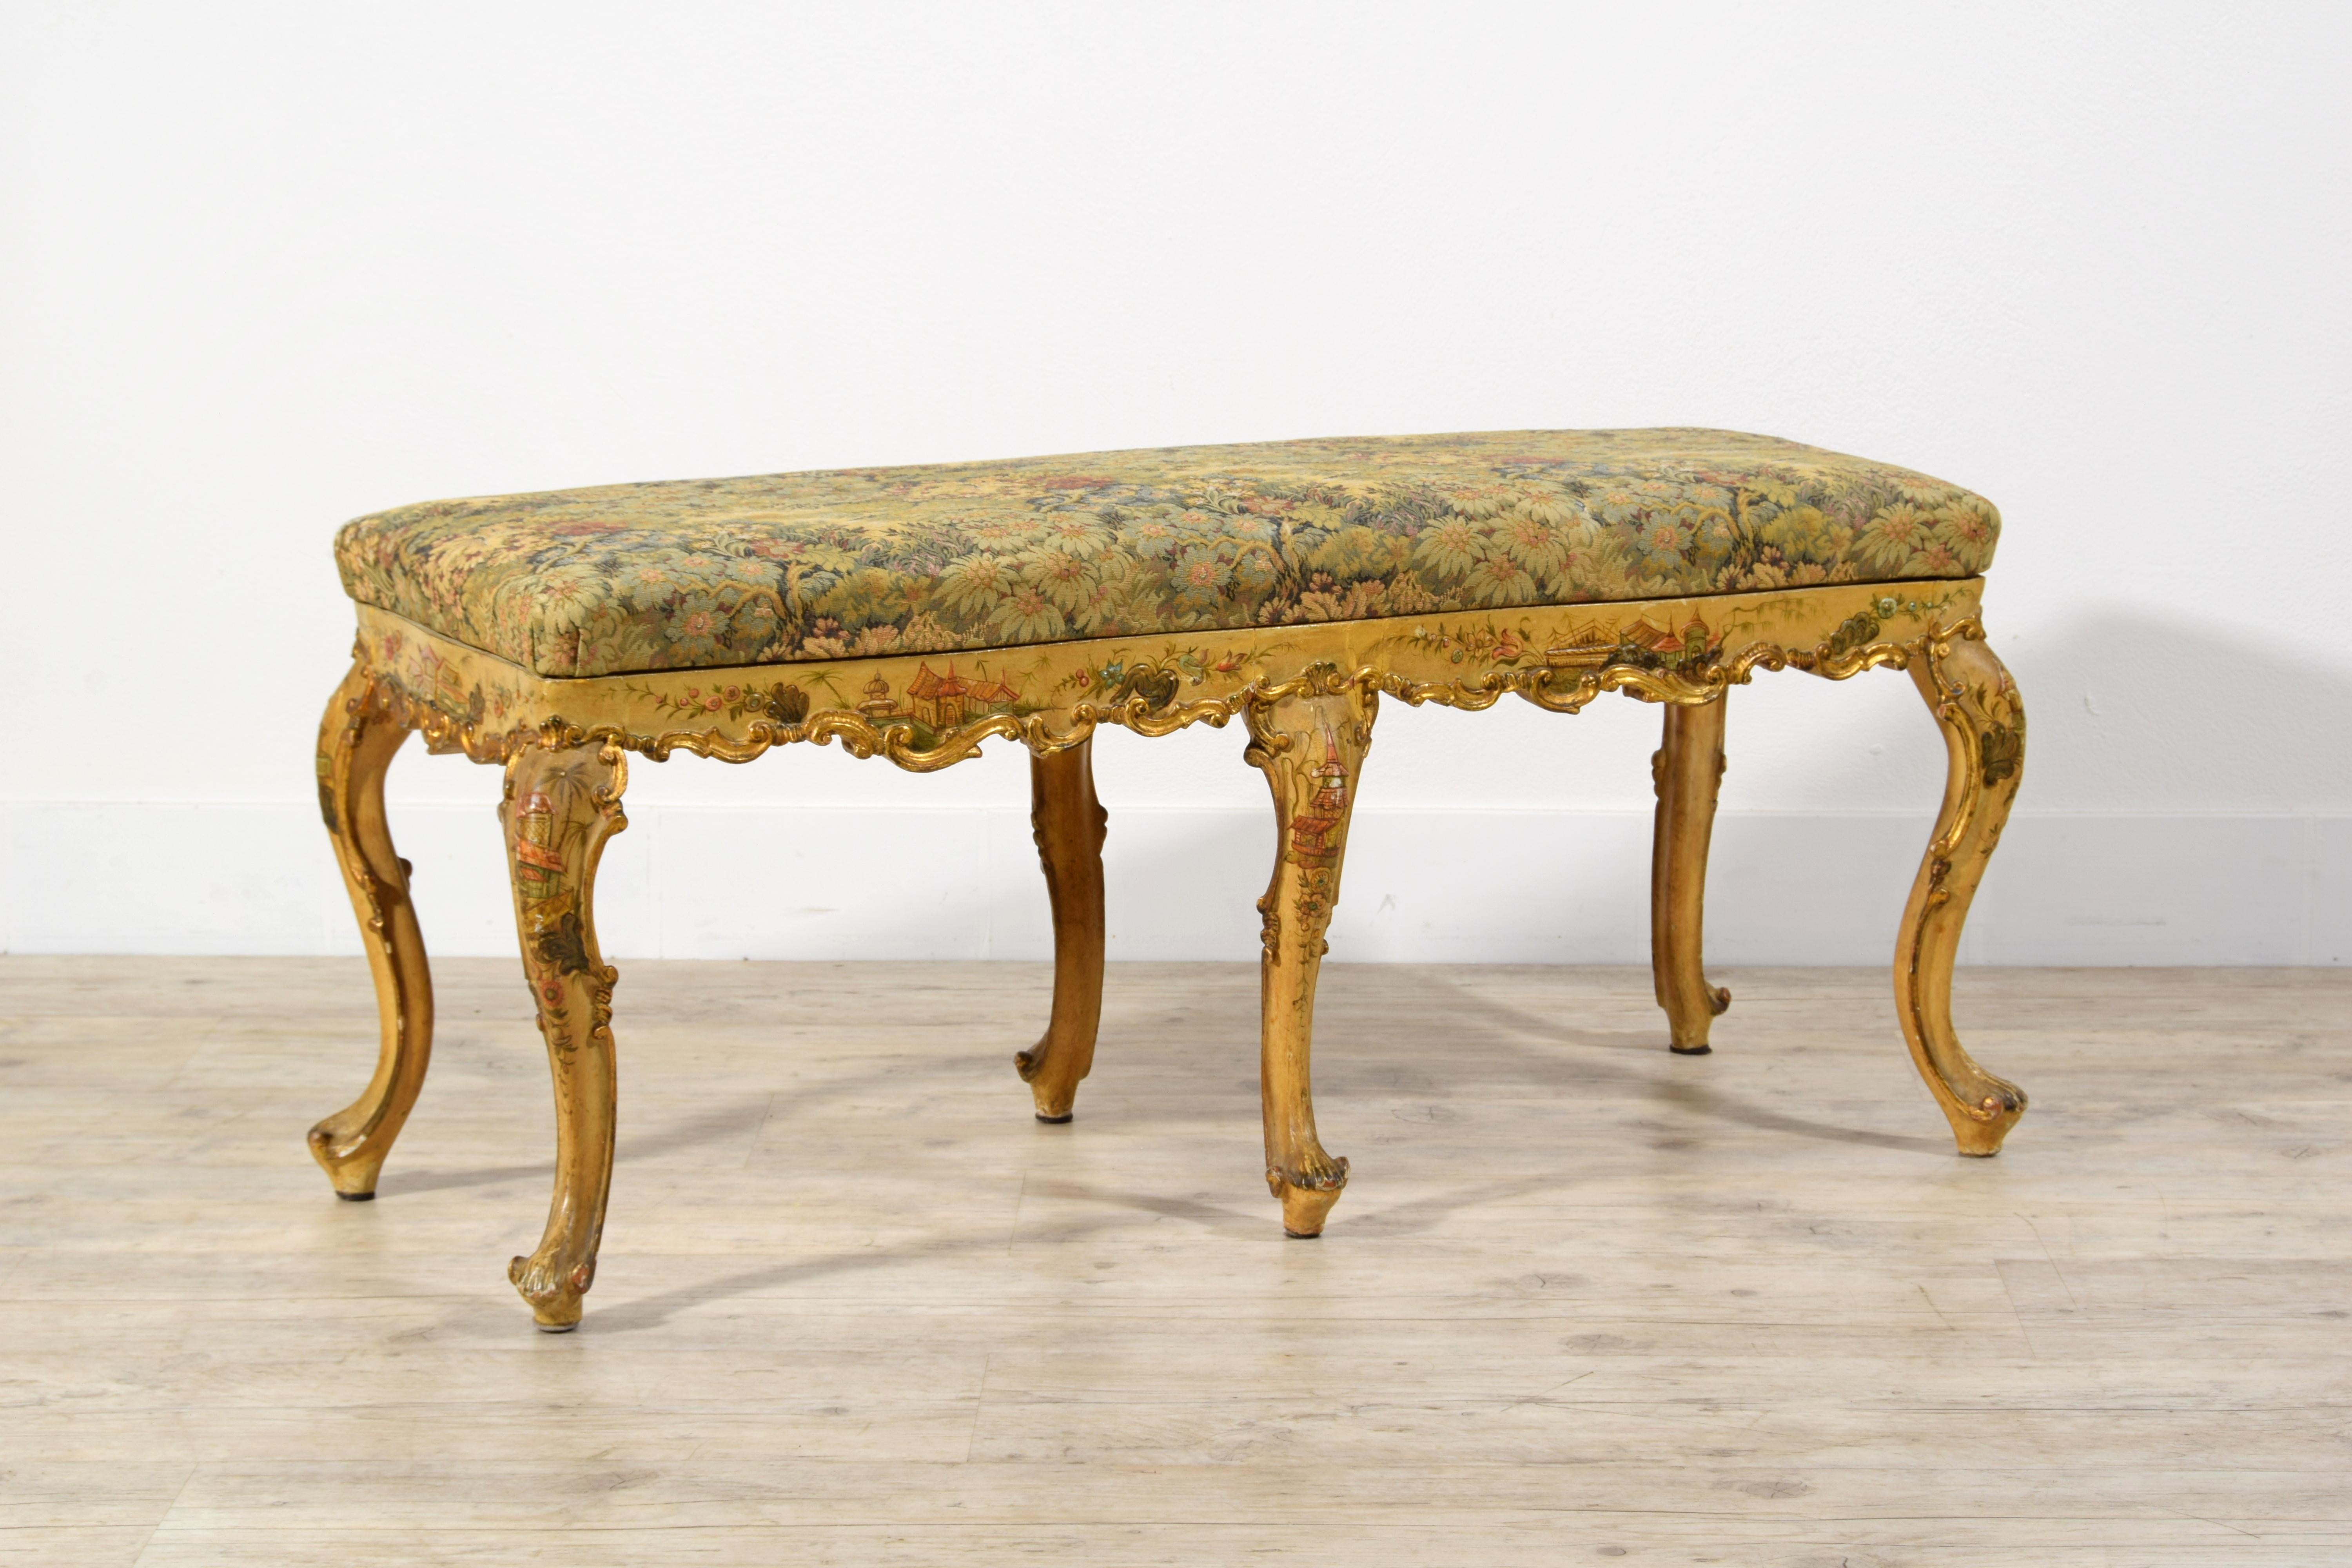 20th Century, Venetian Baroque Stile Carved and Laquered Giltwood Bench For Sale 12